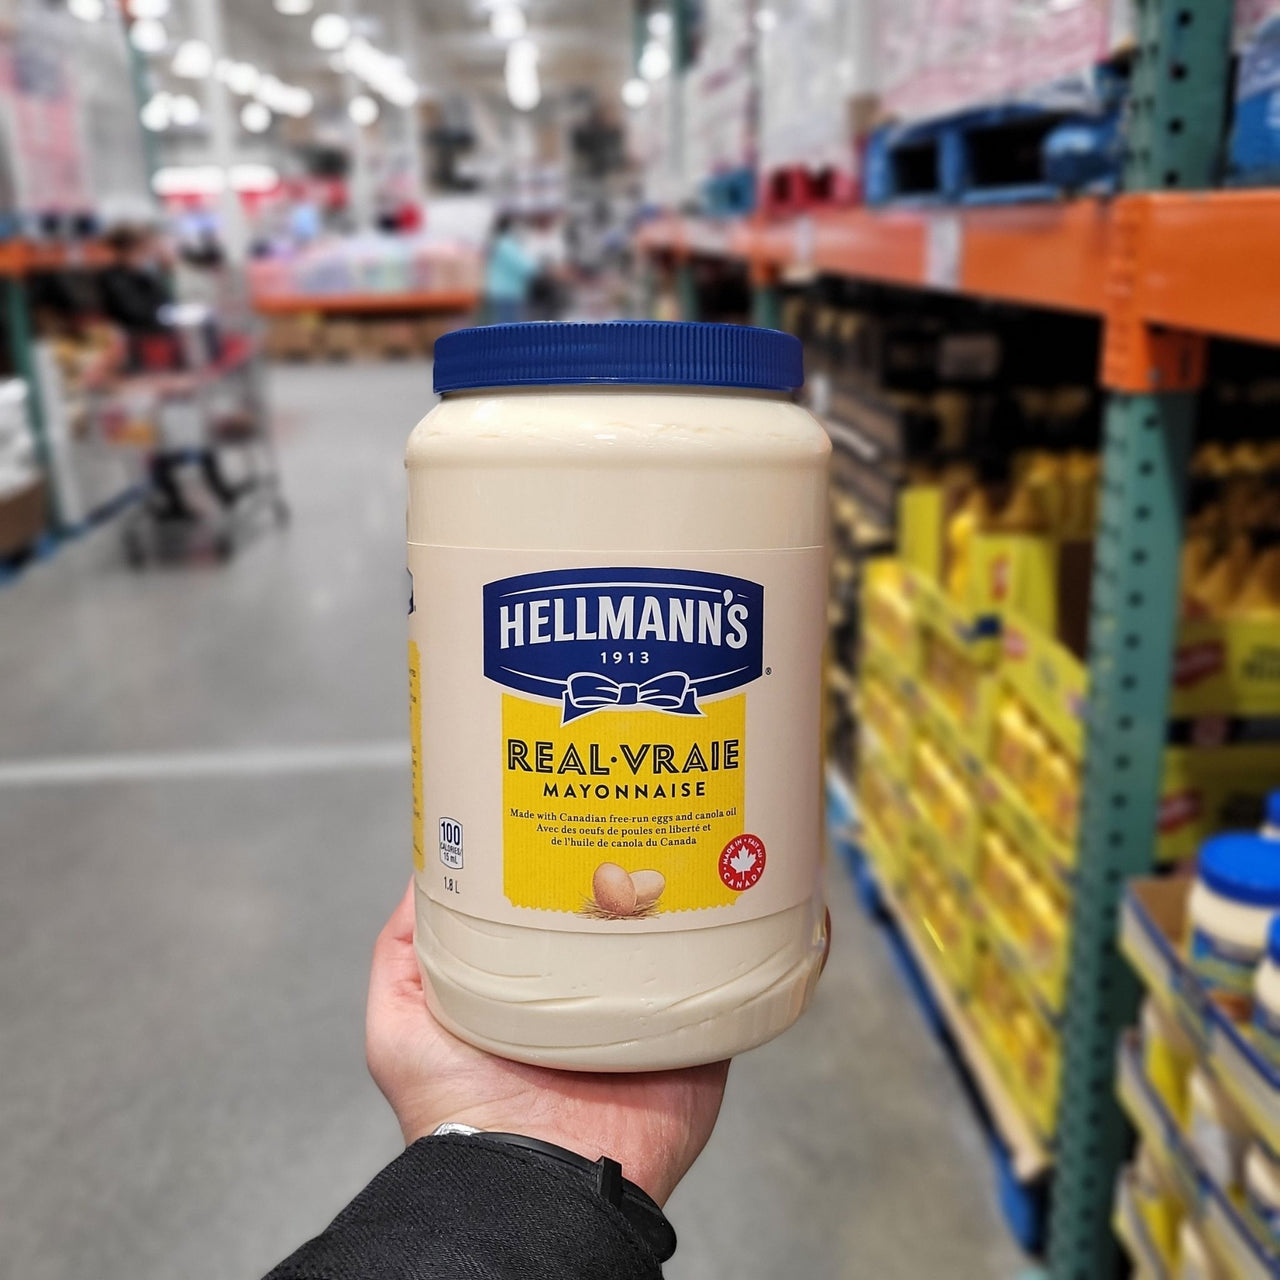 Hellmann's Real Mayonnaise Shipped to Nunavut – The Northern Shopper